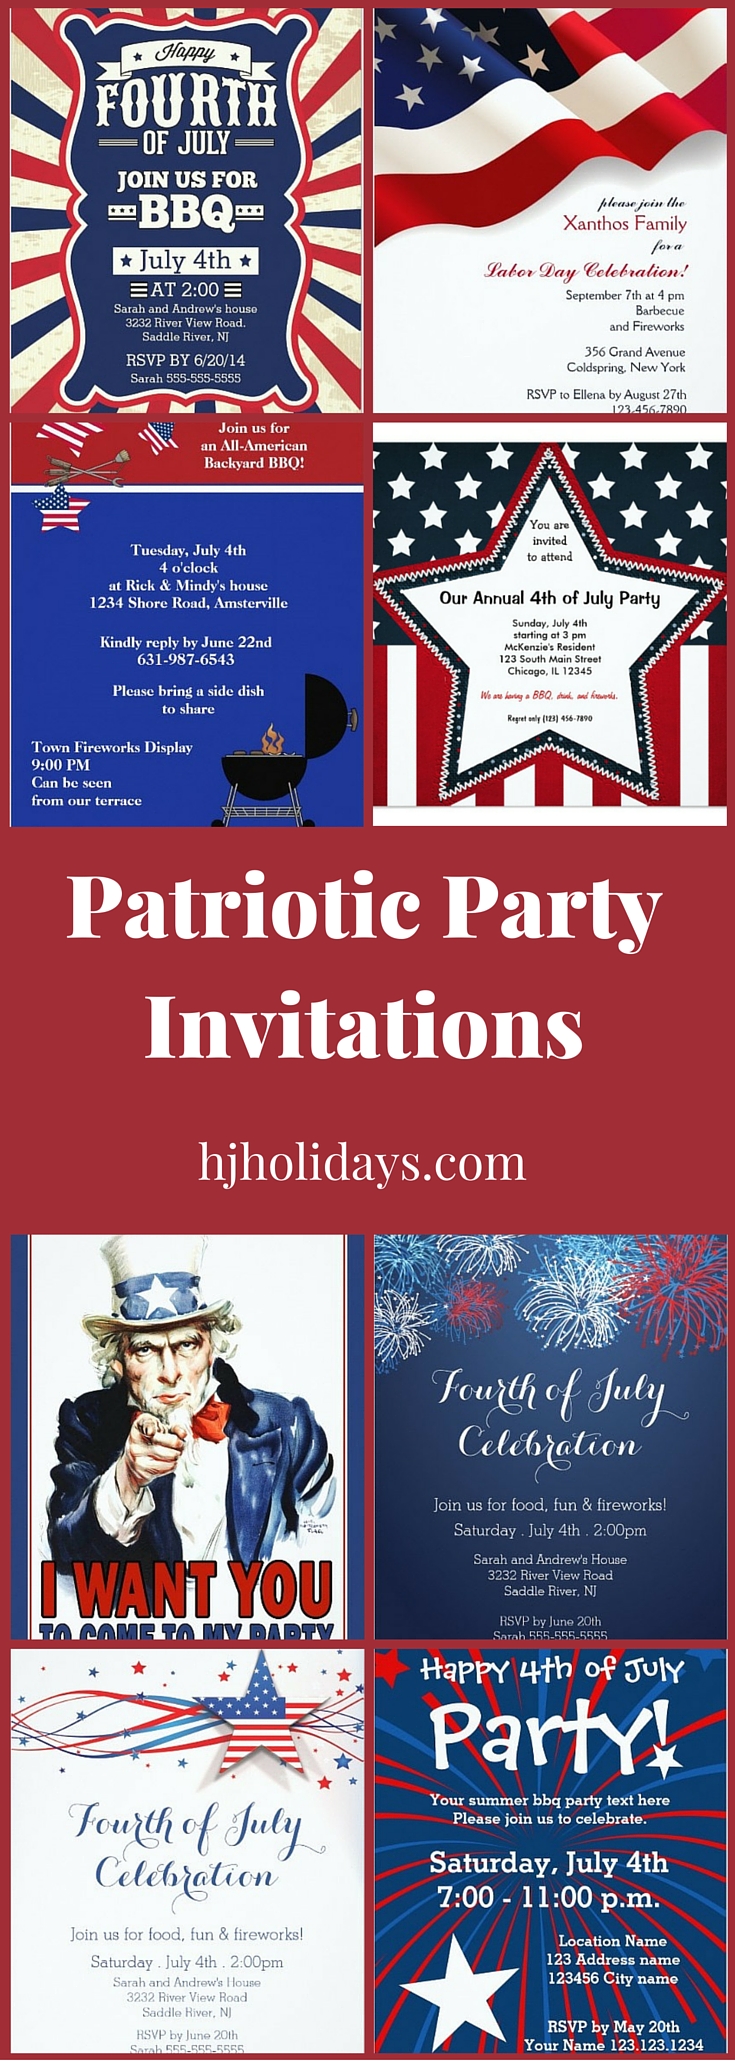 Patriotic Party Invitations for July 4th, Memorial Day and Labor Day